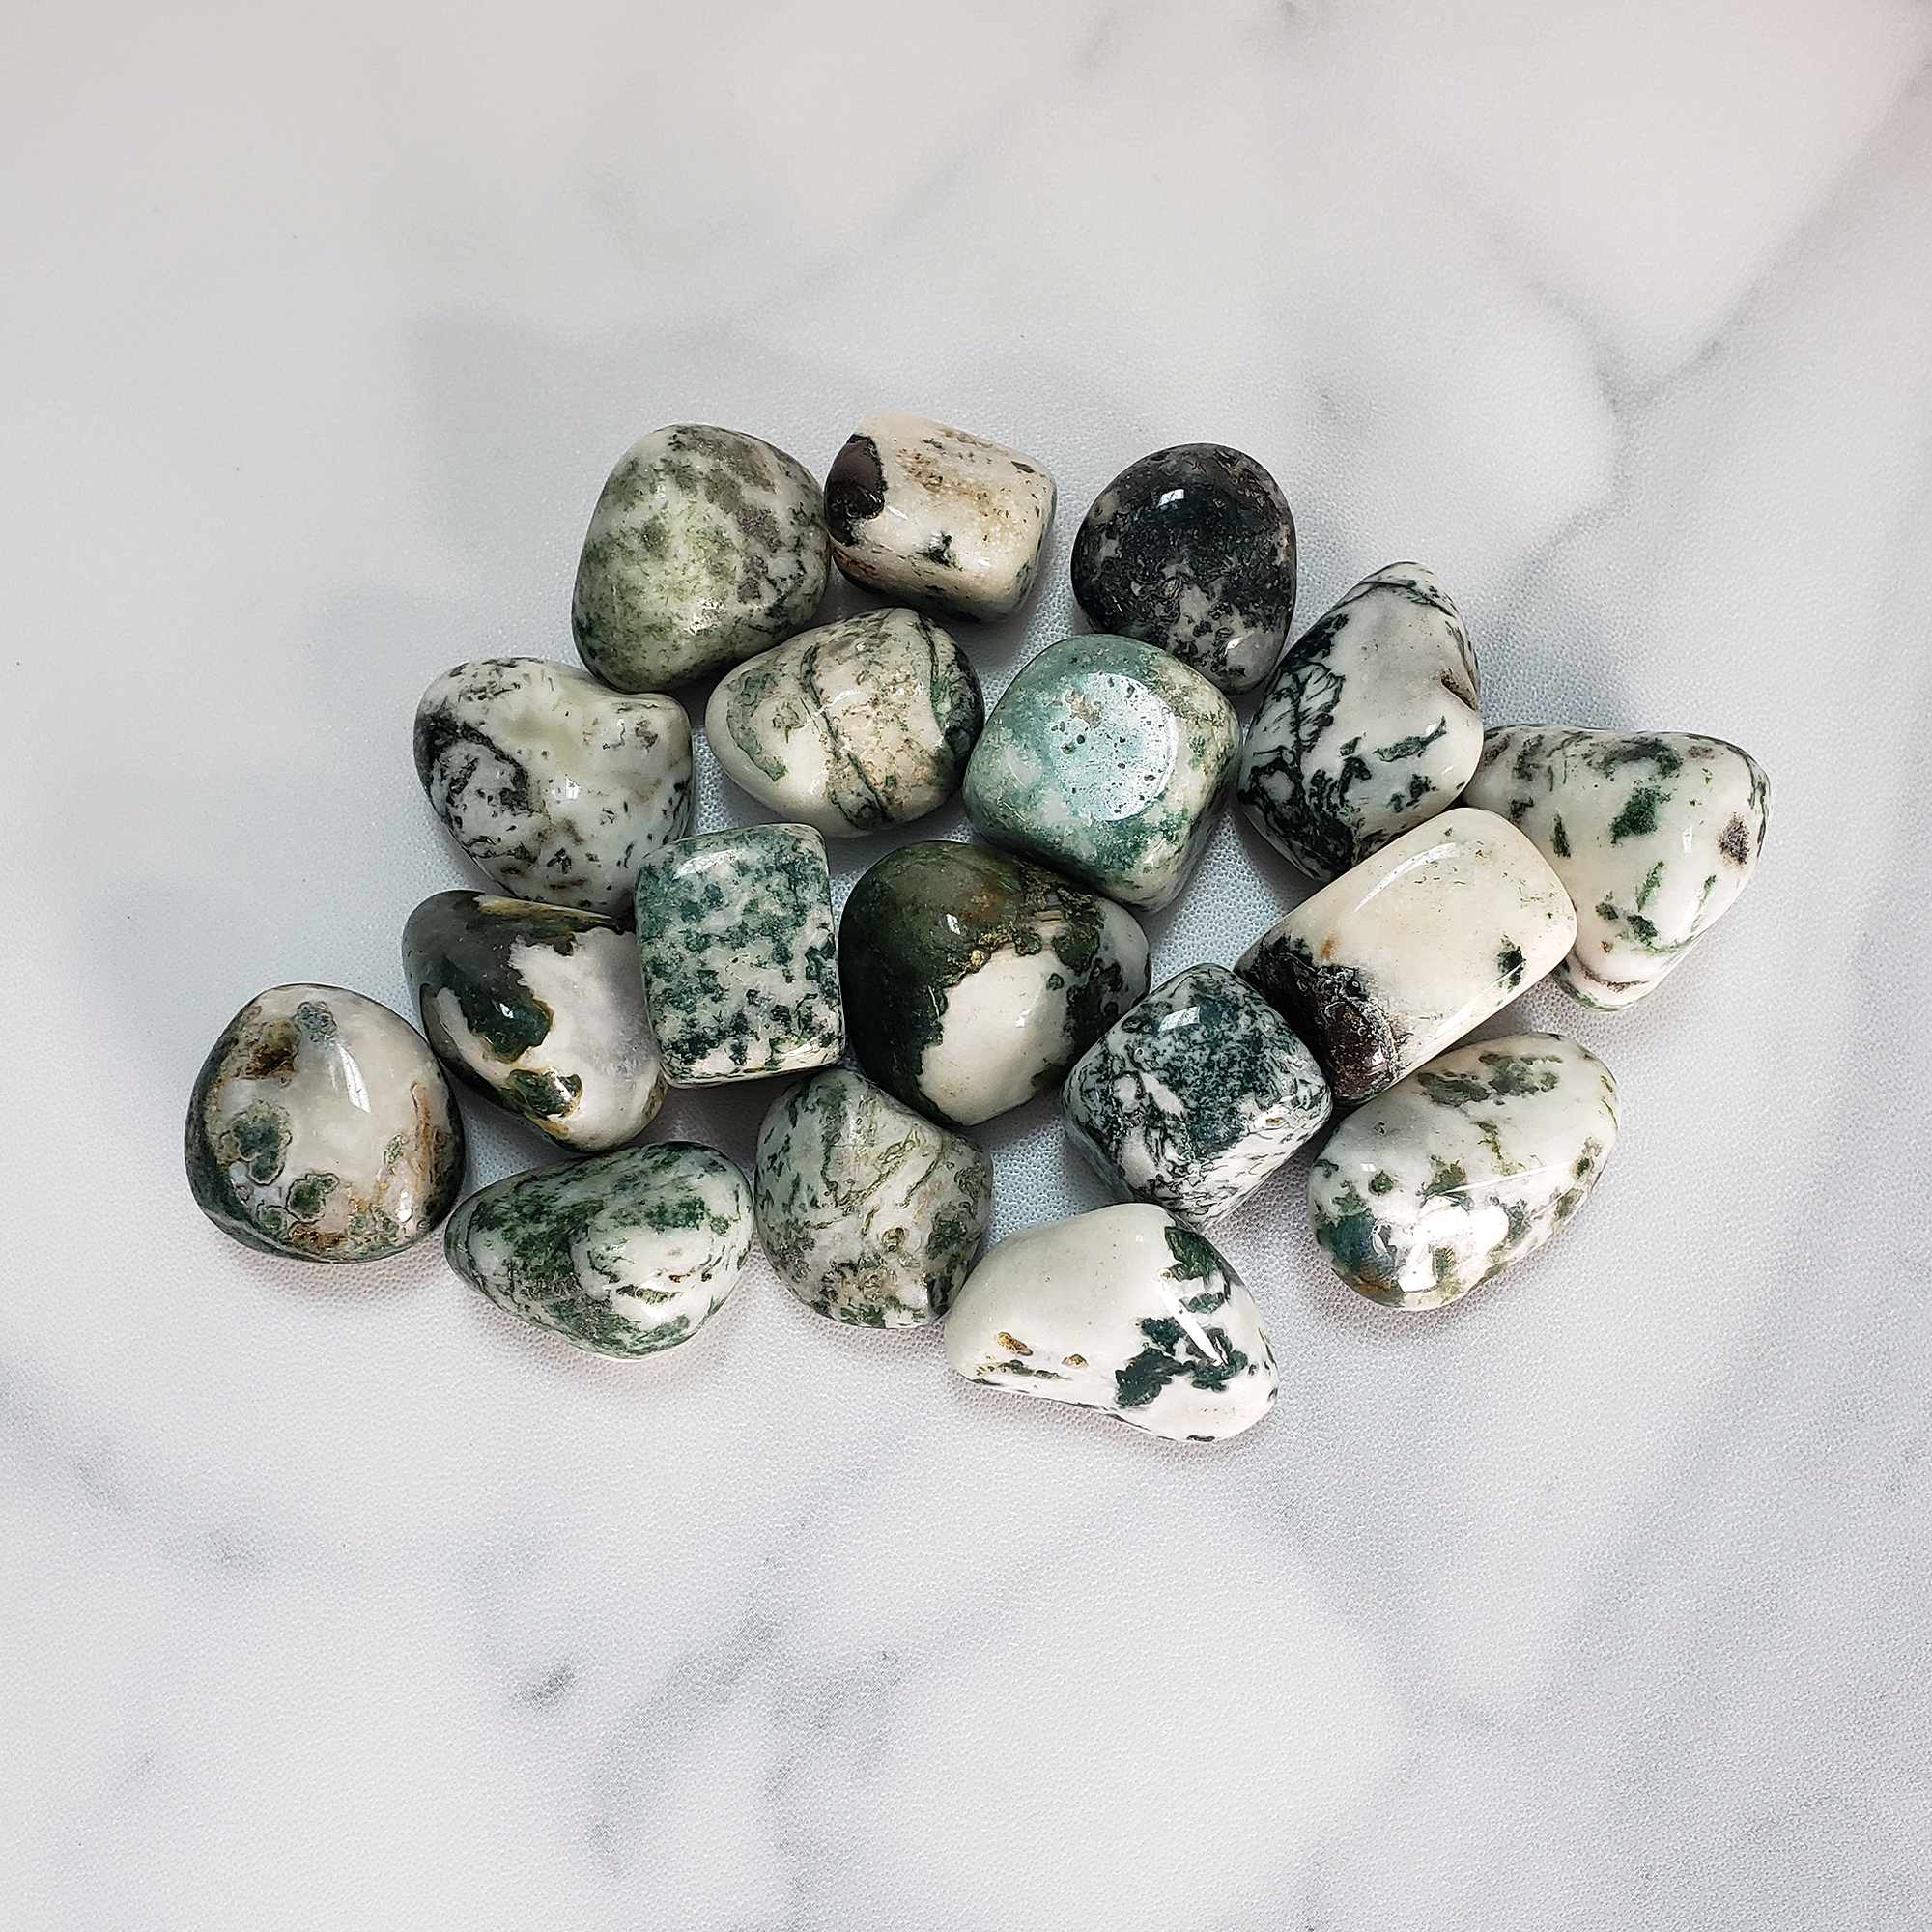 Tree Agate Natural Tumbled Crystal - One Stone - Group on Tile from Above